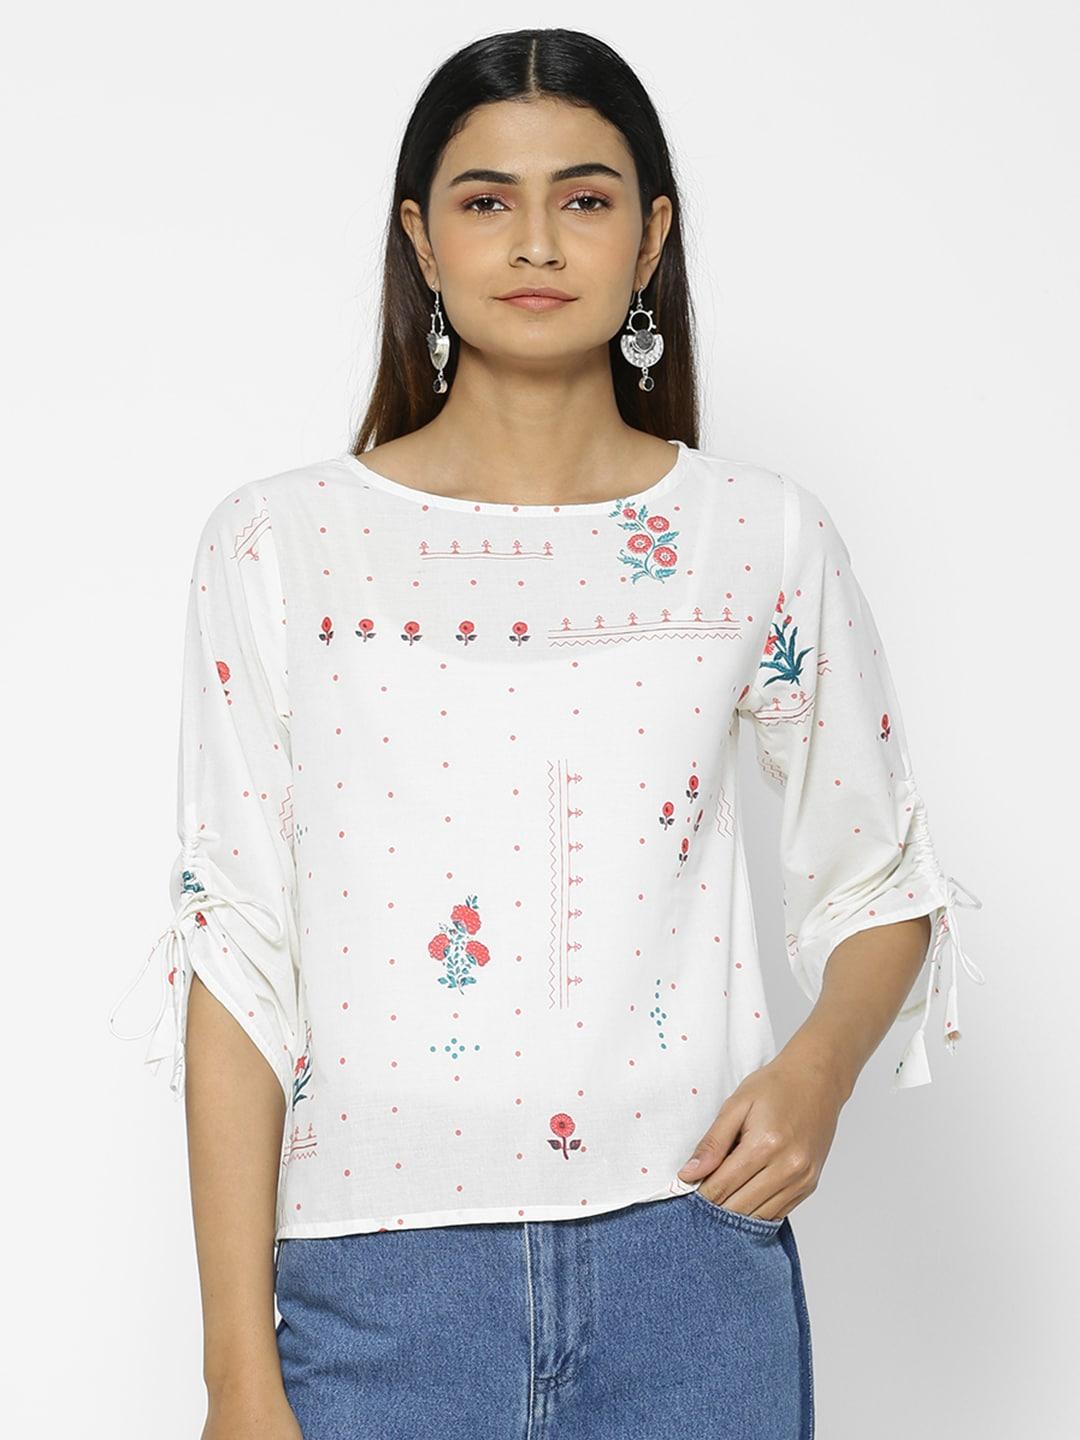 saaki-women-off-white-&-red-floral-printed-embroidered-top